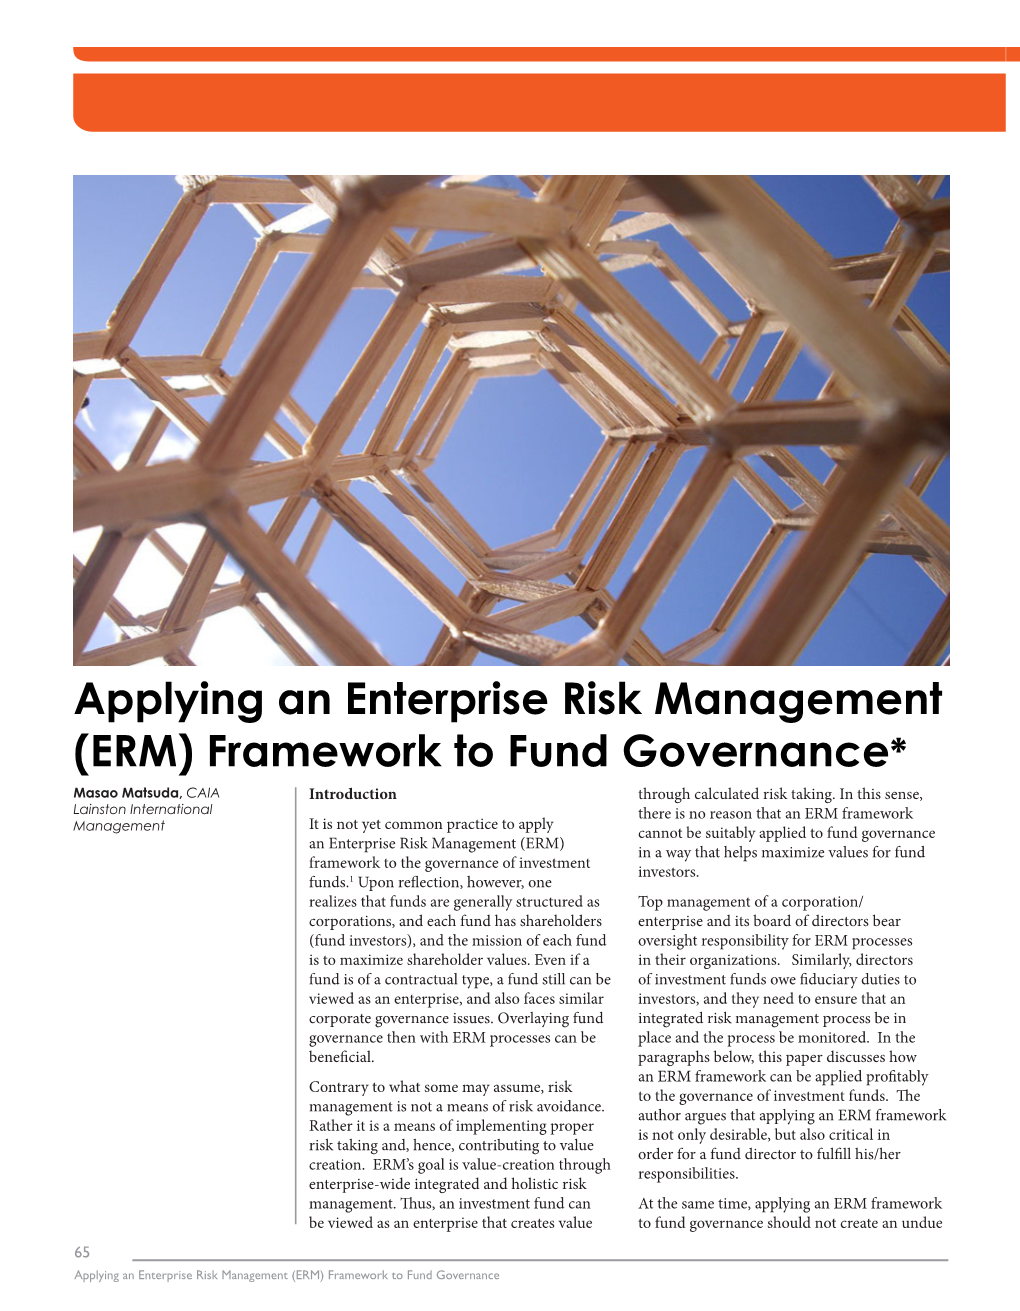 Applying an Enterprise Risk Management (ERM) Framework to Fund Governance* Masao Matsuda, CAIA Introduction Through Calculated Risk Taking